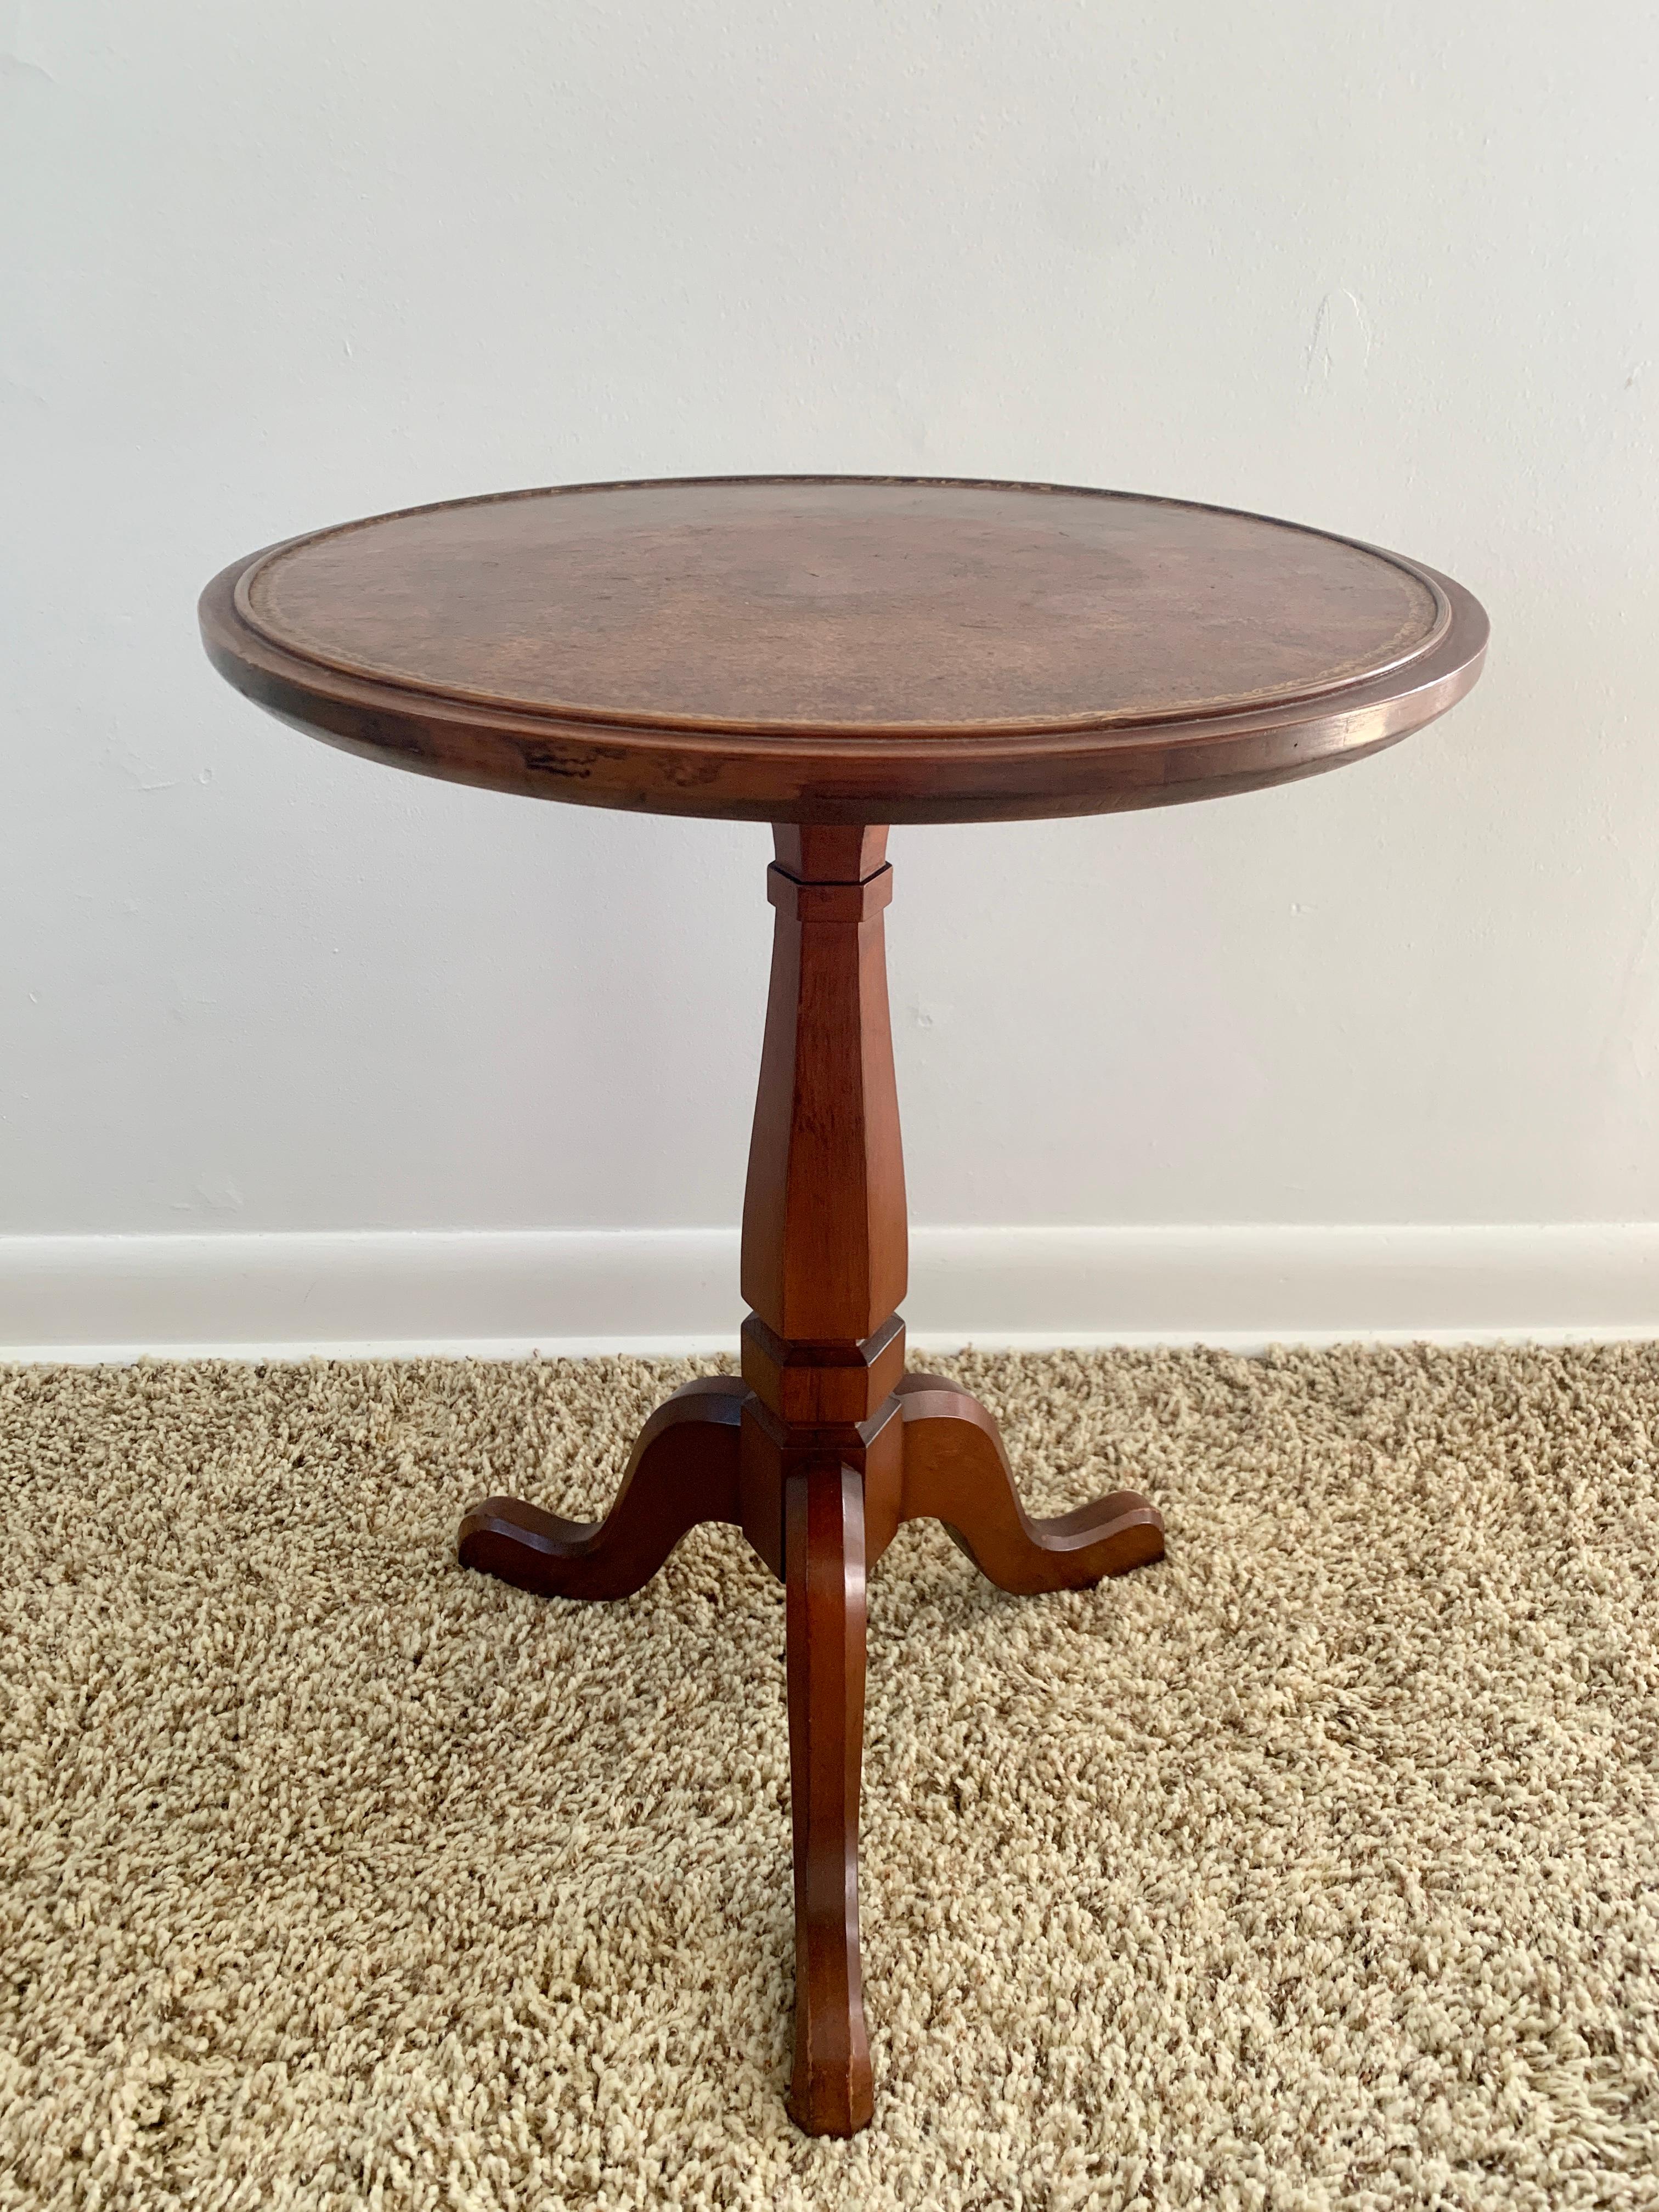 Vintage Georgian Embossed Leather Top Cherry Wood Round Side Table For Sale 3